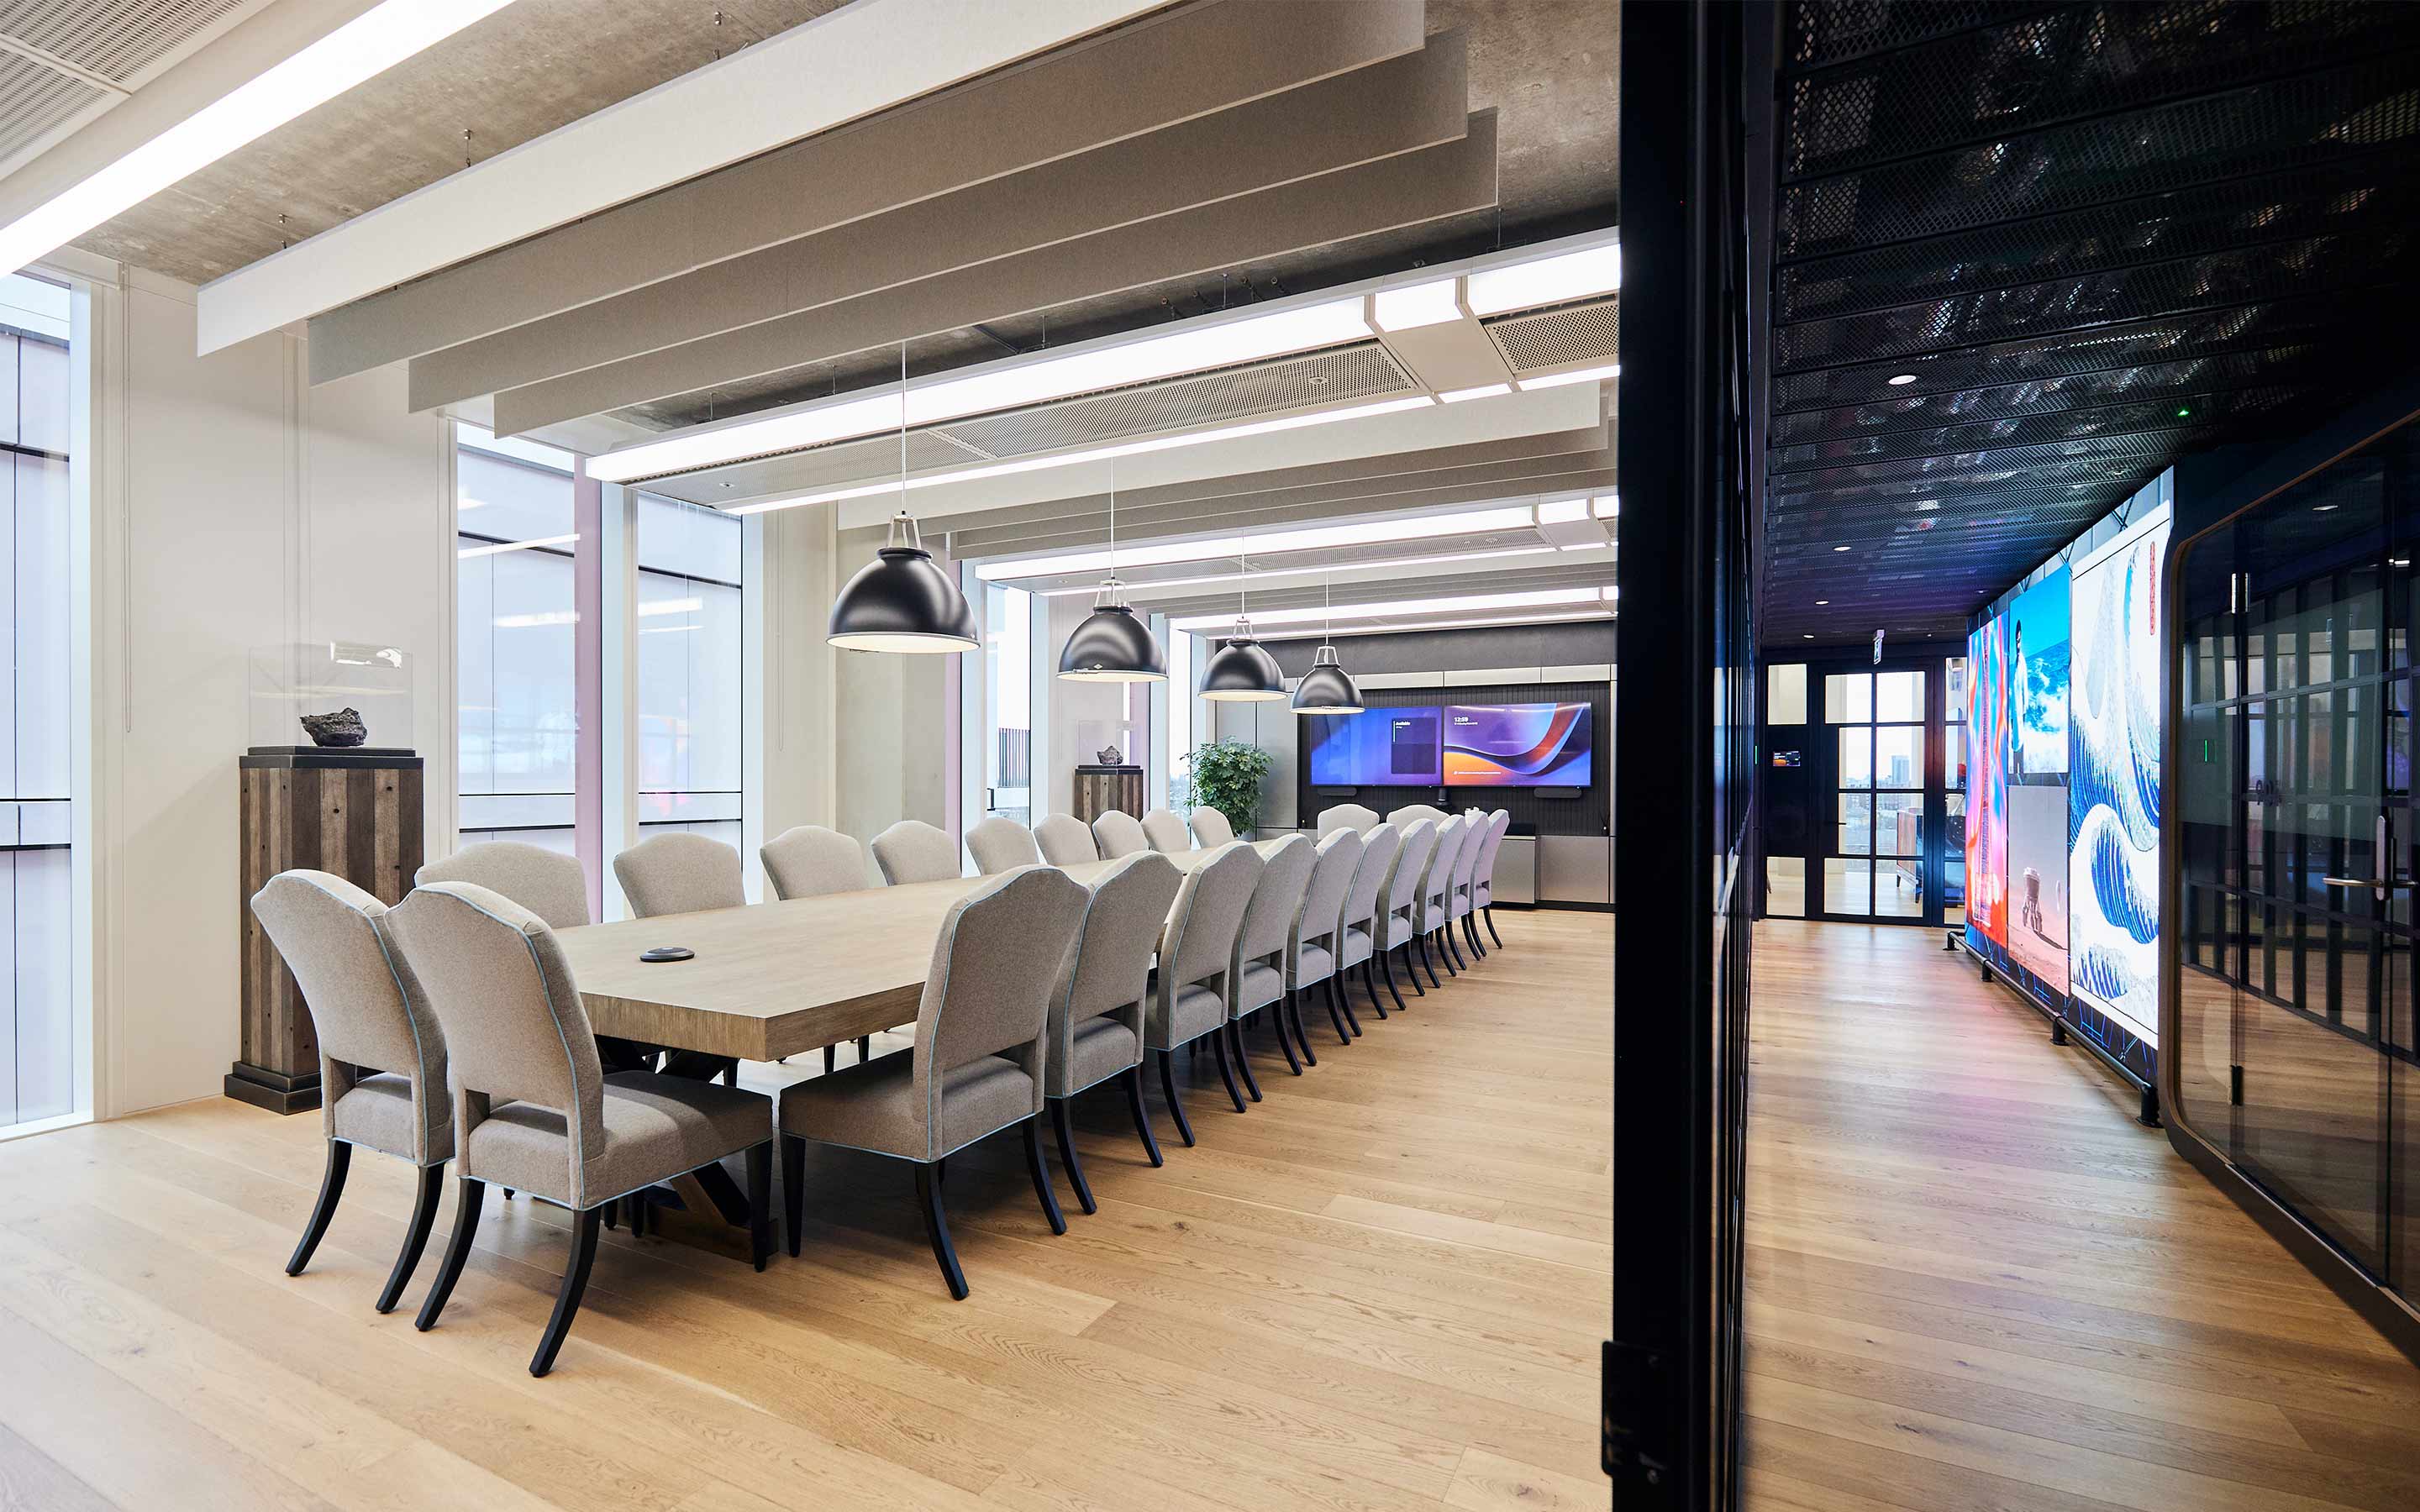 A modern boardroom with sleek furniture, large conference table, high-tech presentation equipment, and elegant lighting fixtures